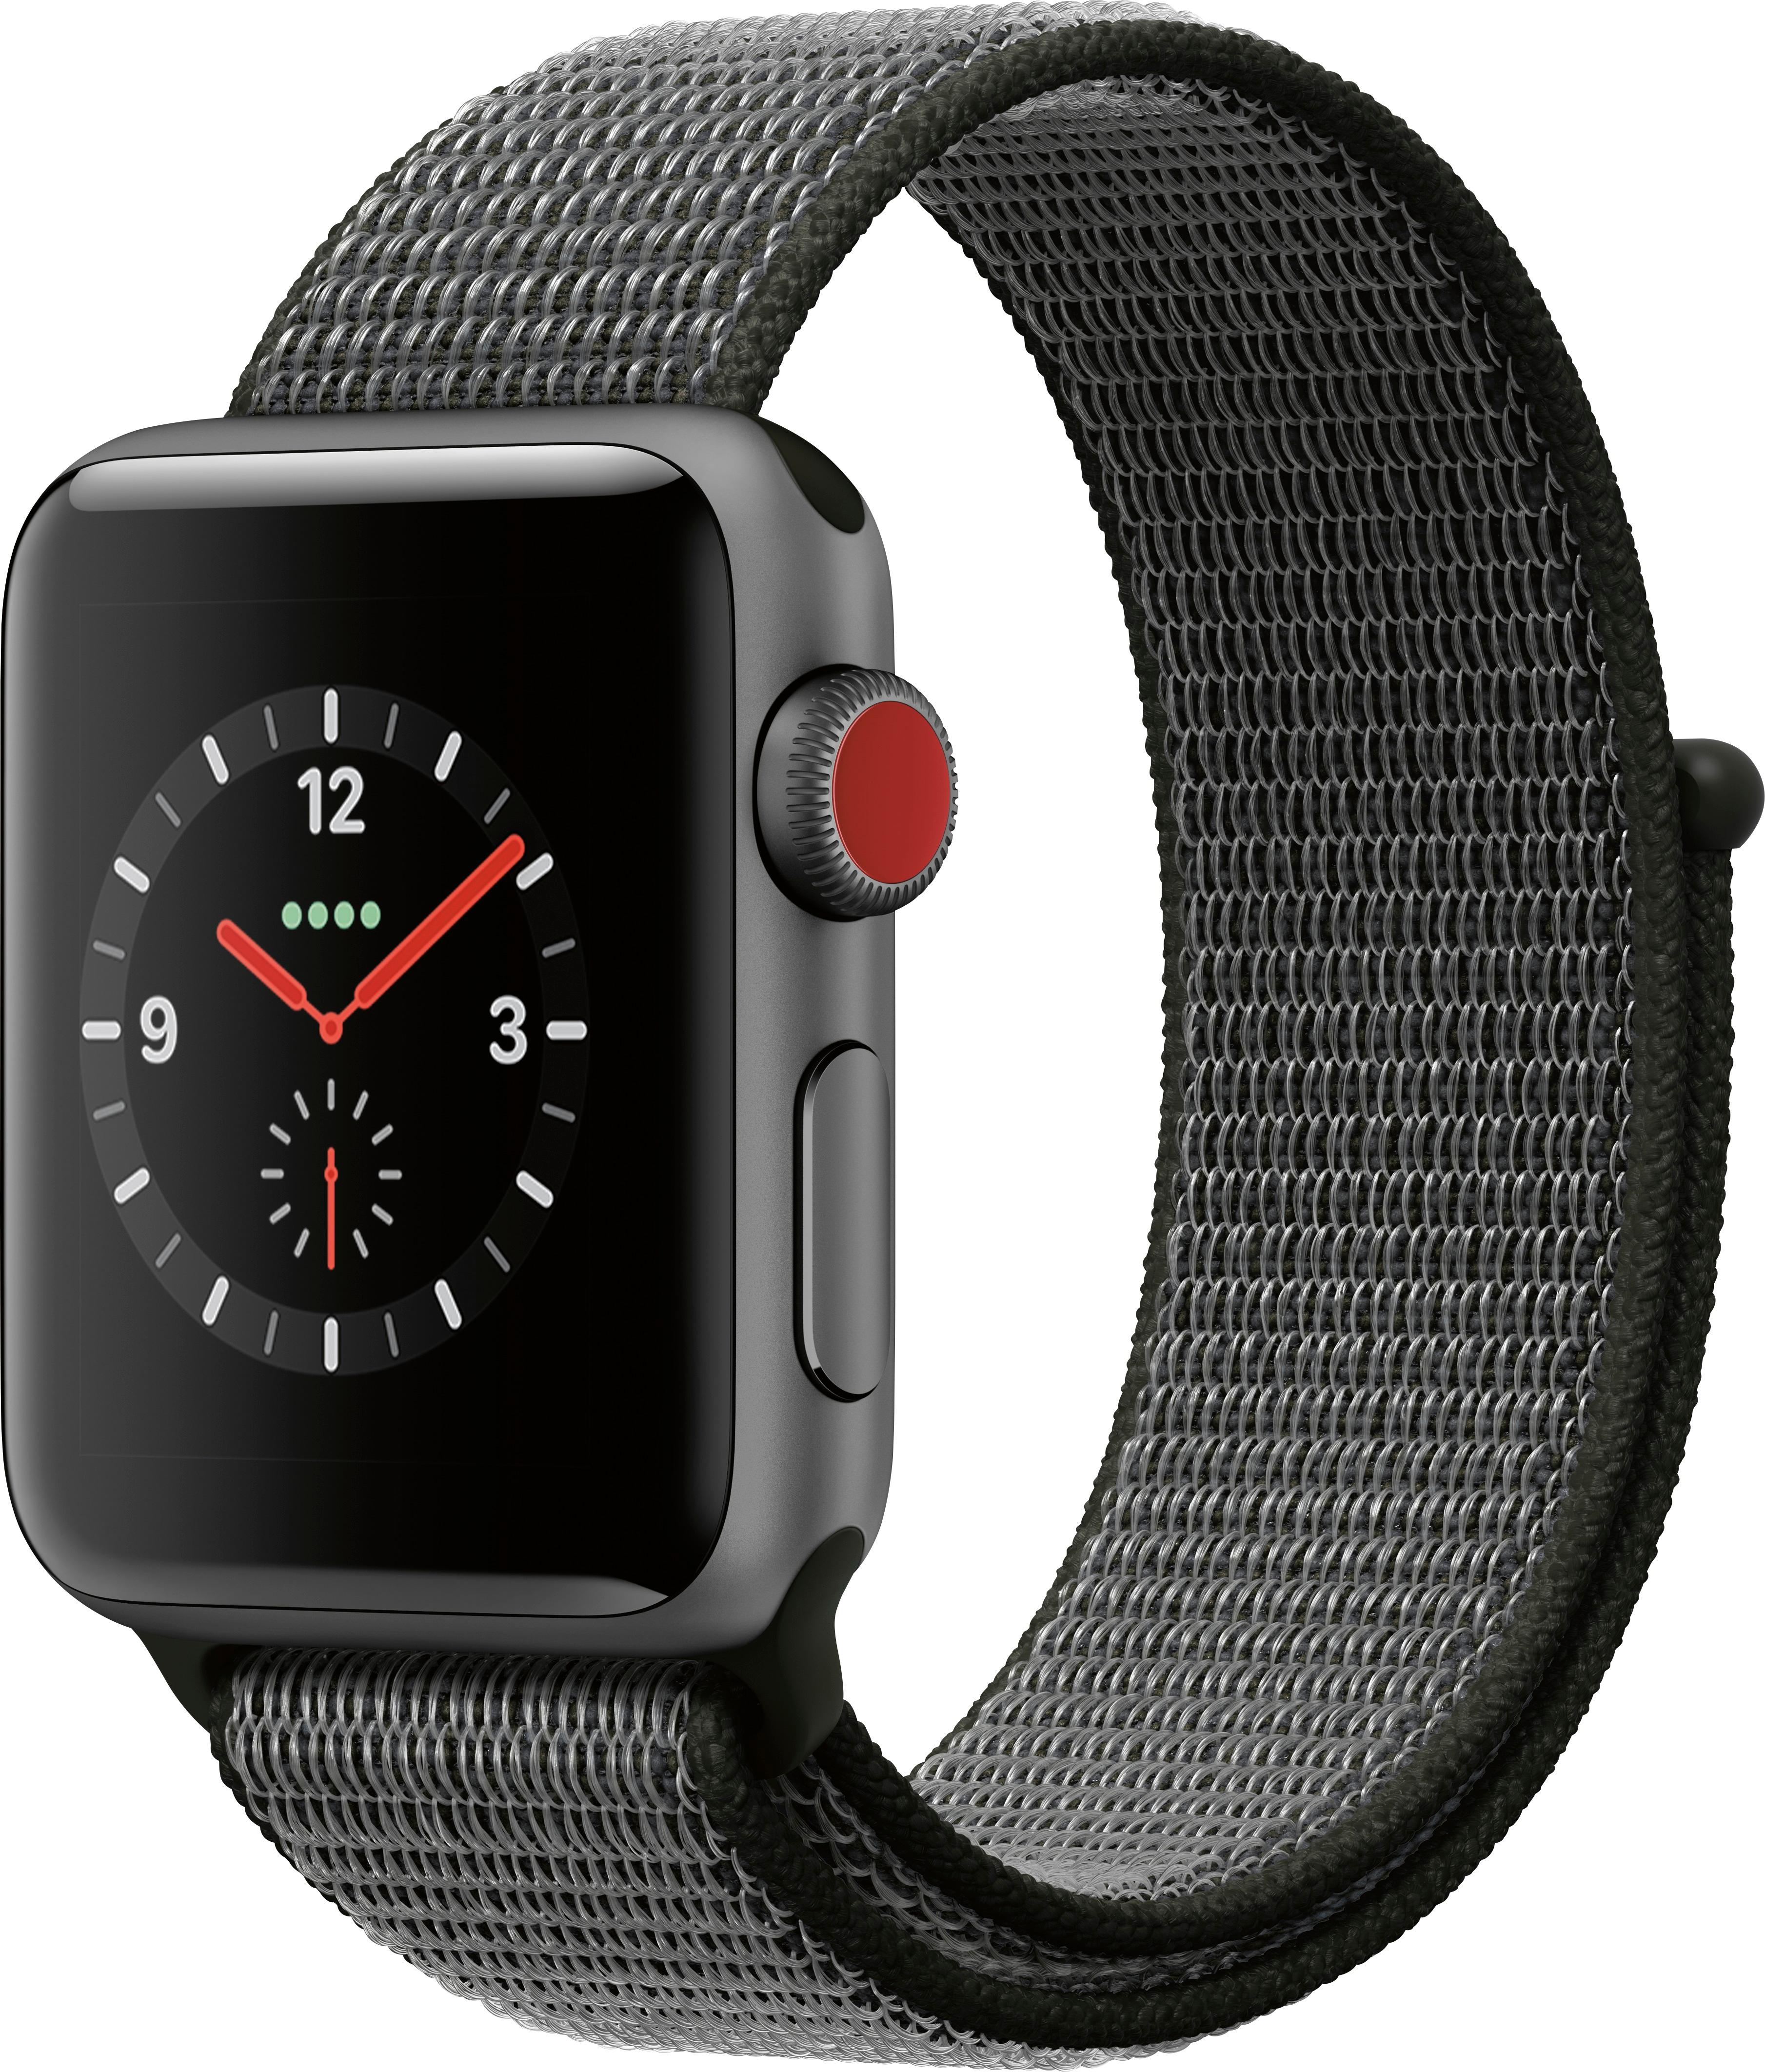 Apple Watch Series 3 GPS + Cellular 38mm Space Gray Aluminum with 